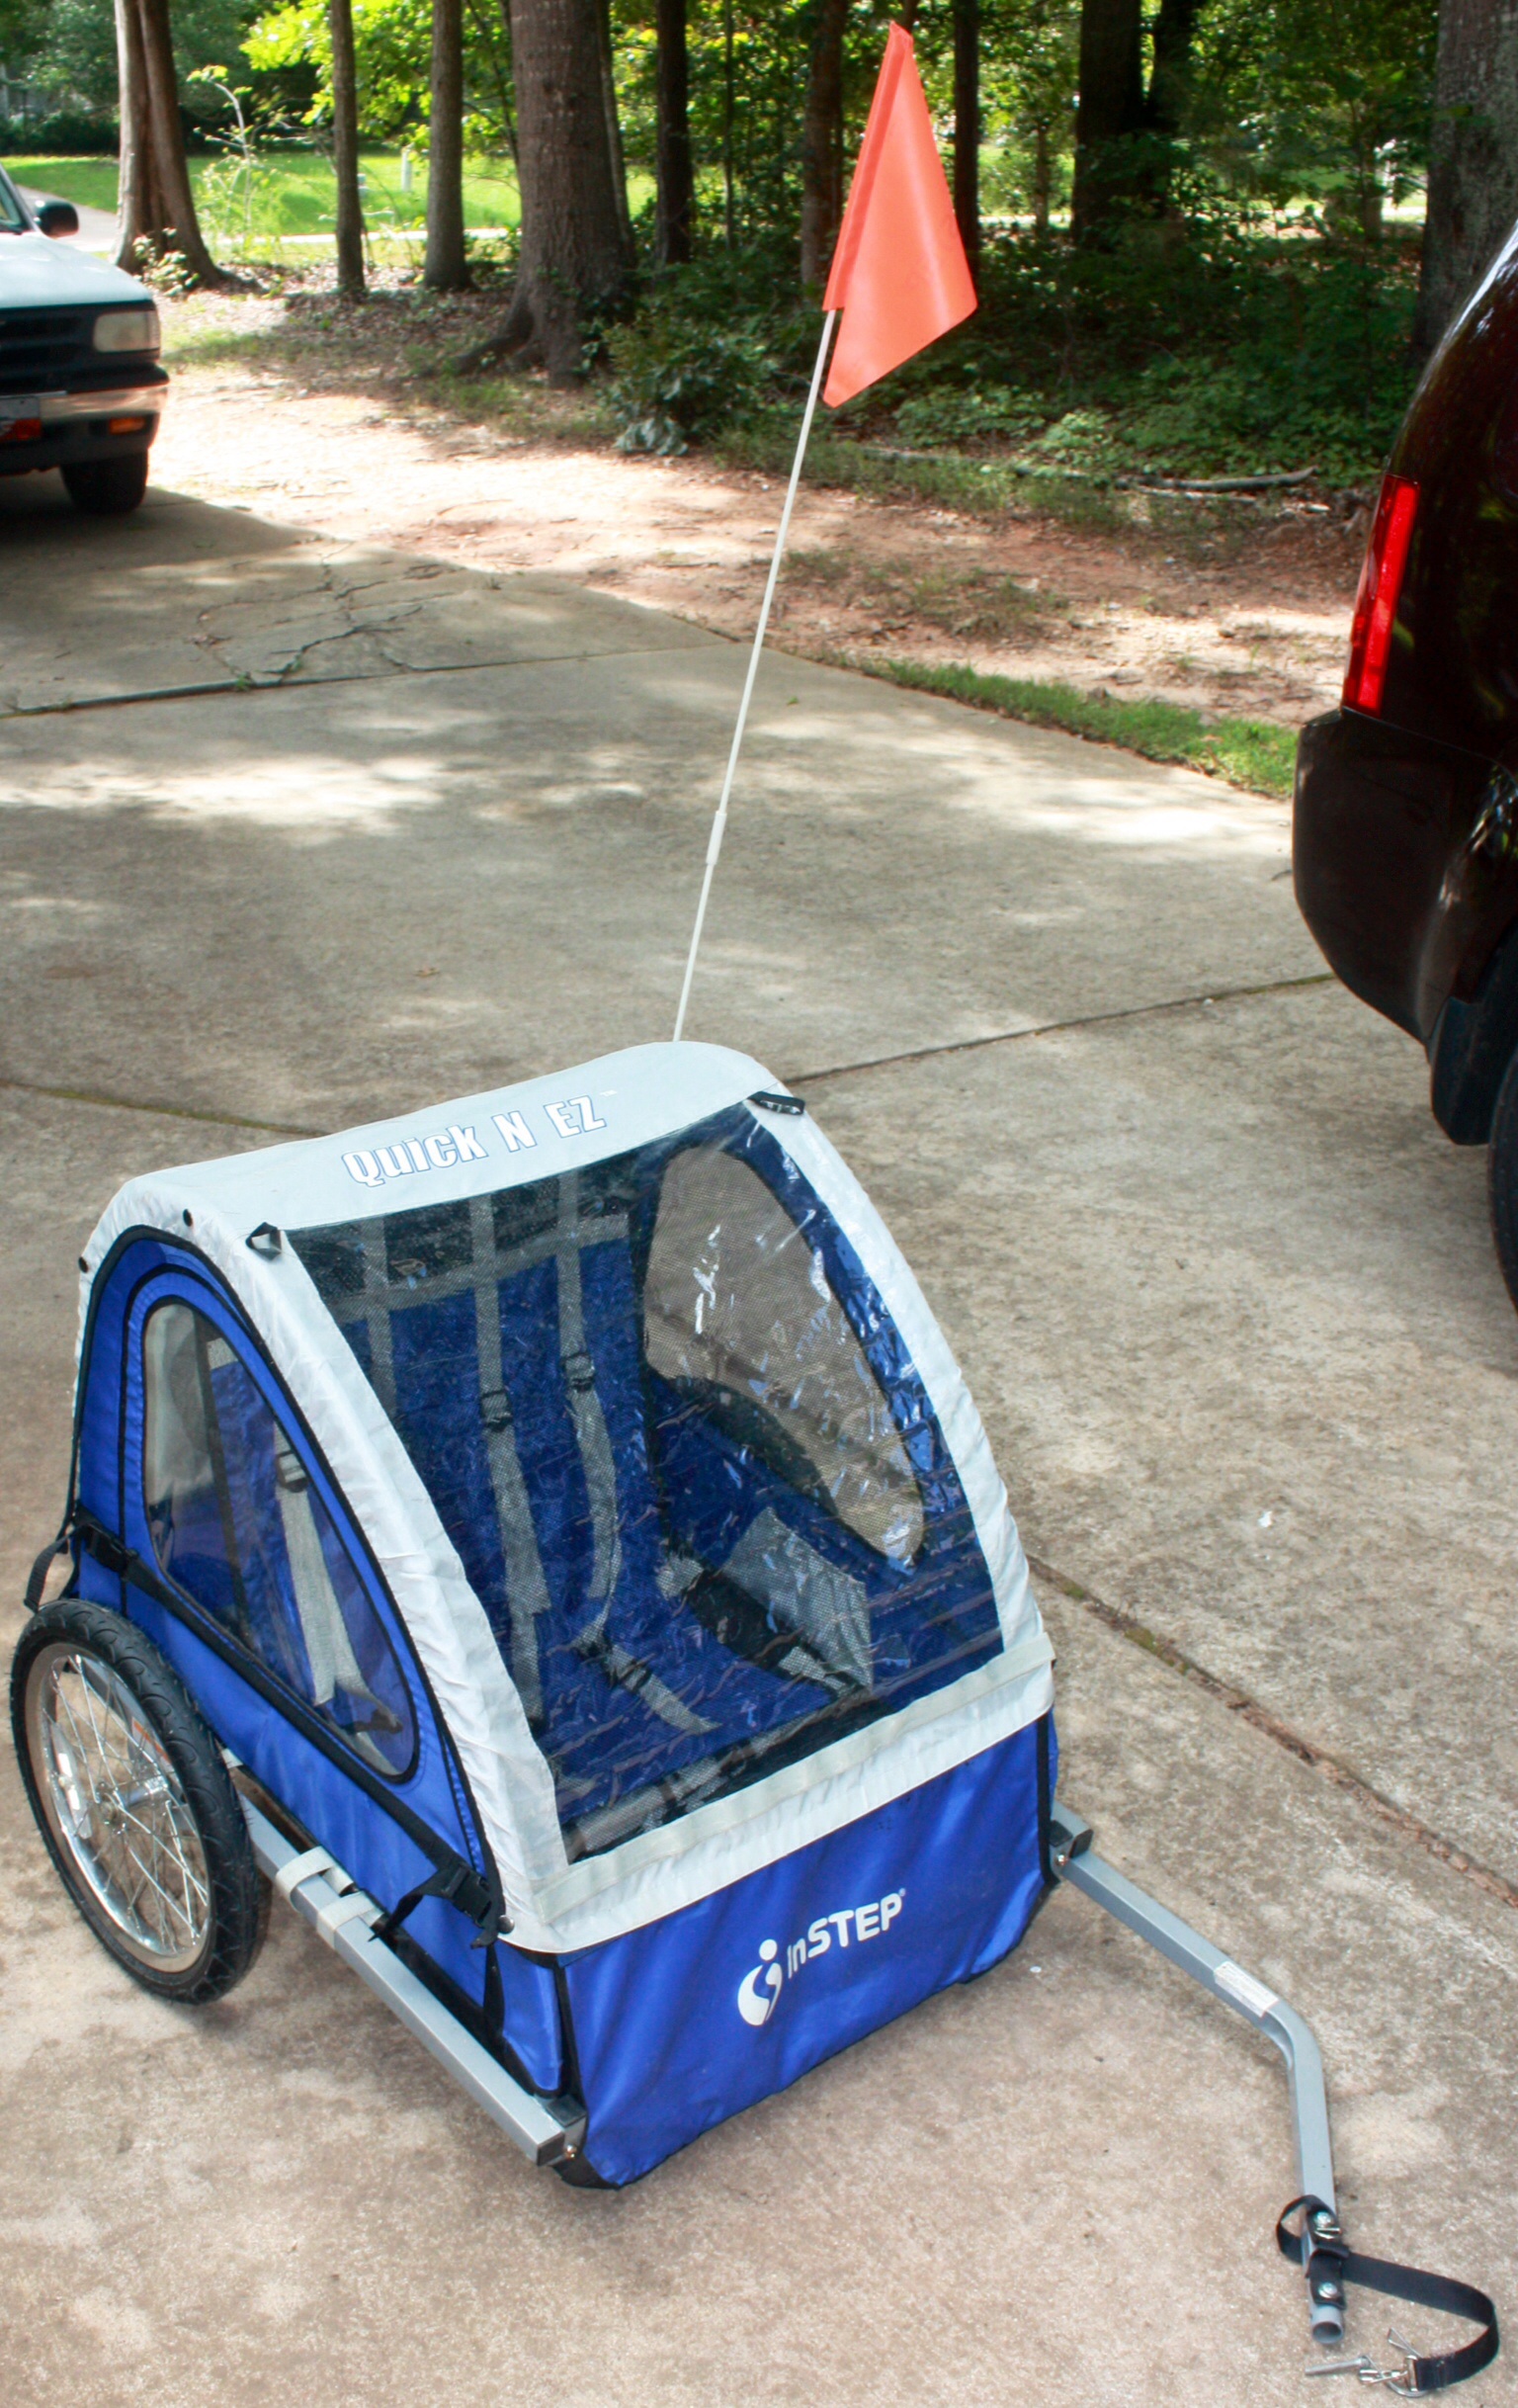 InStep double seater bike trailer